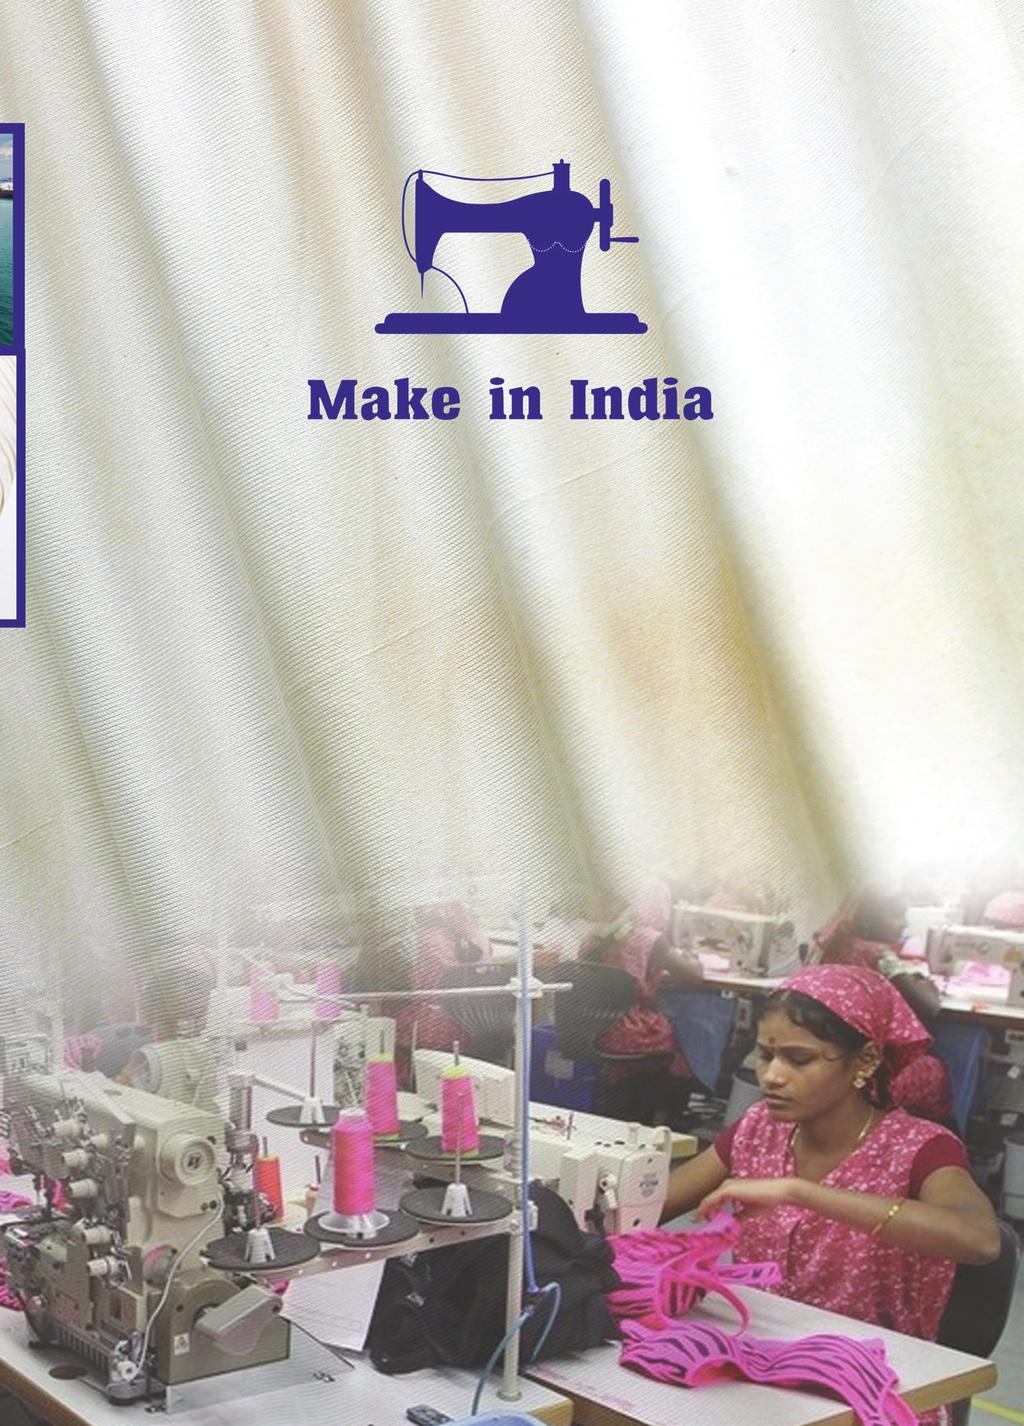 rising wages plague China, the present moment offers the textile industry in India